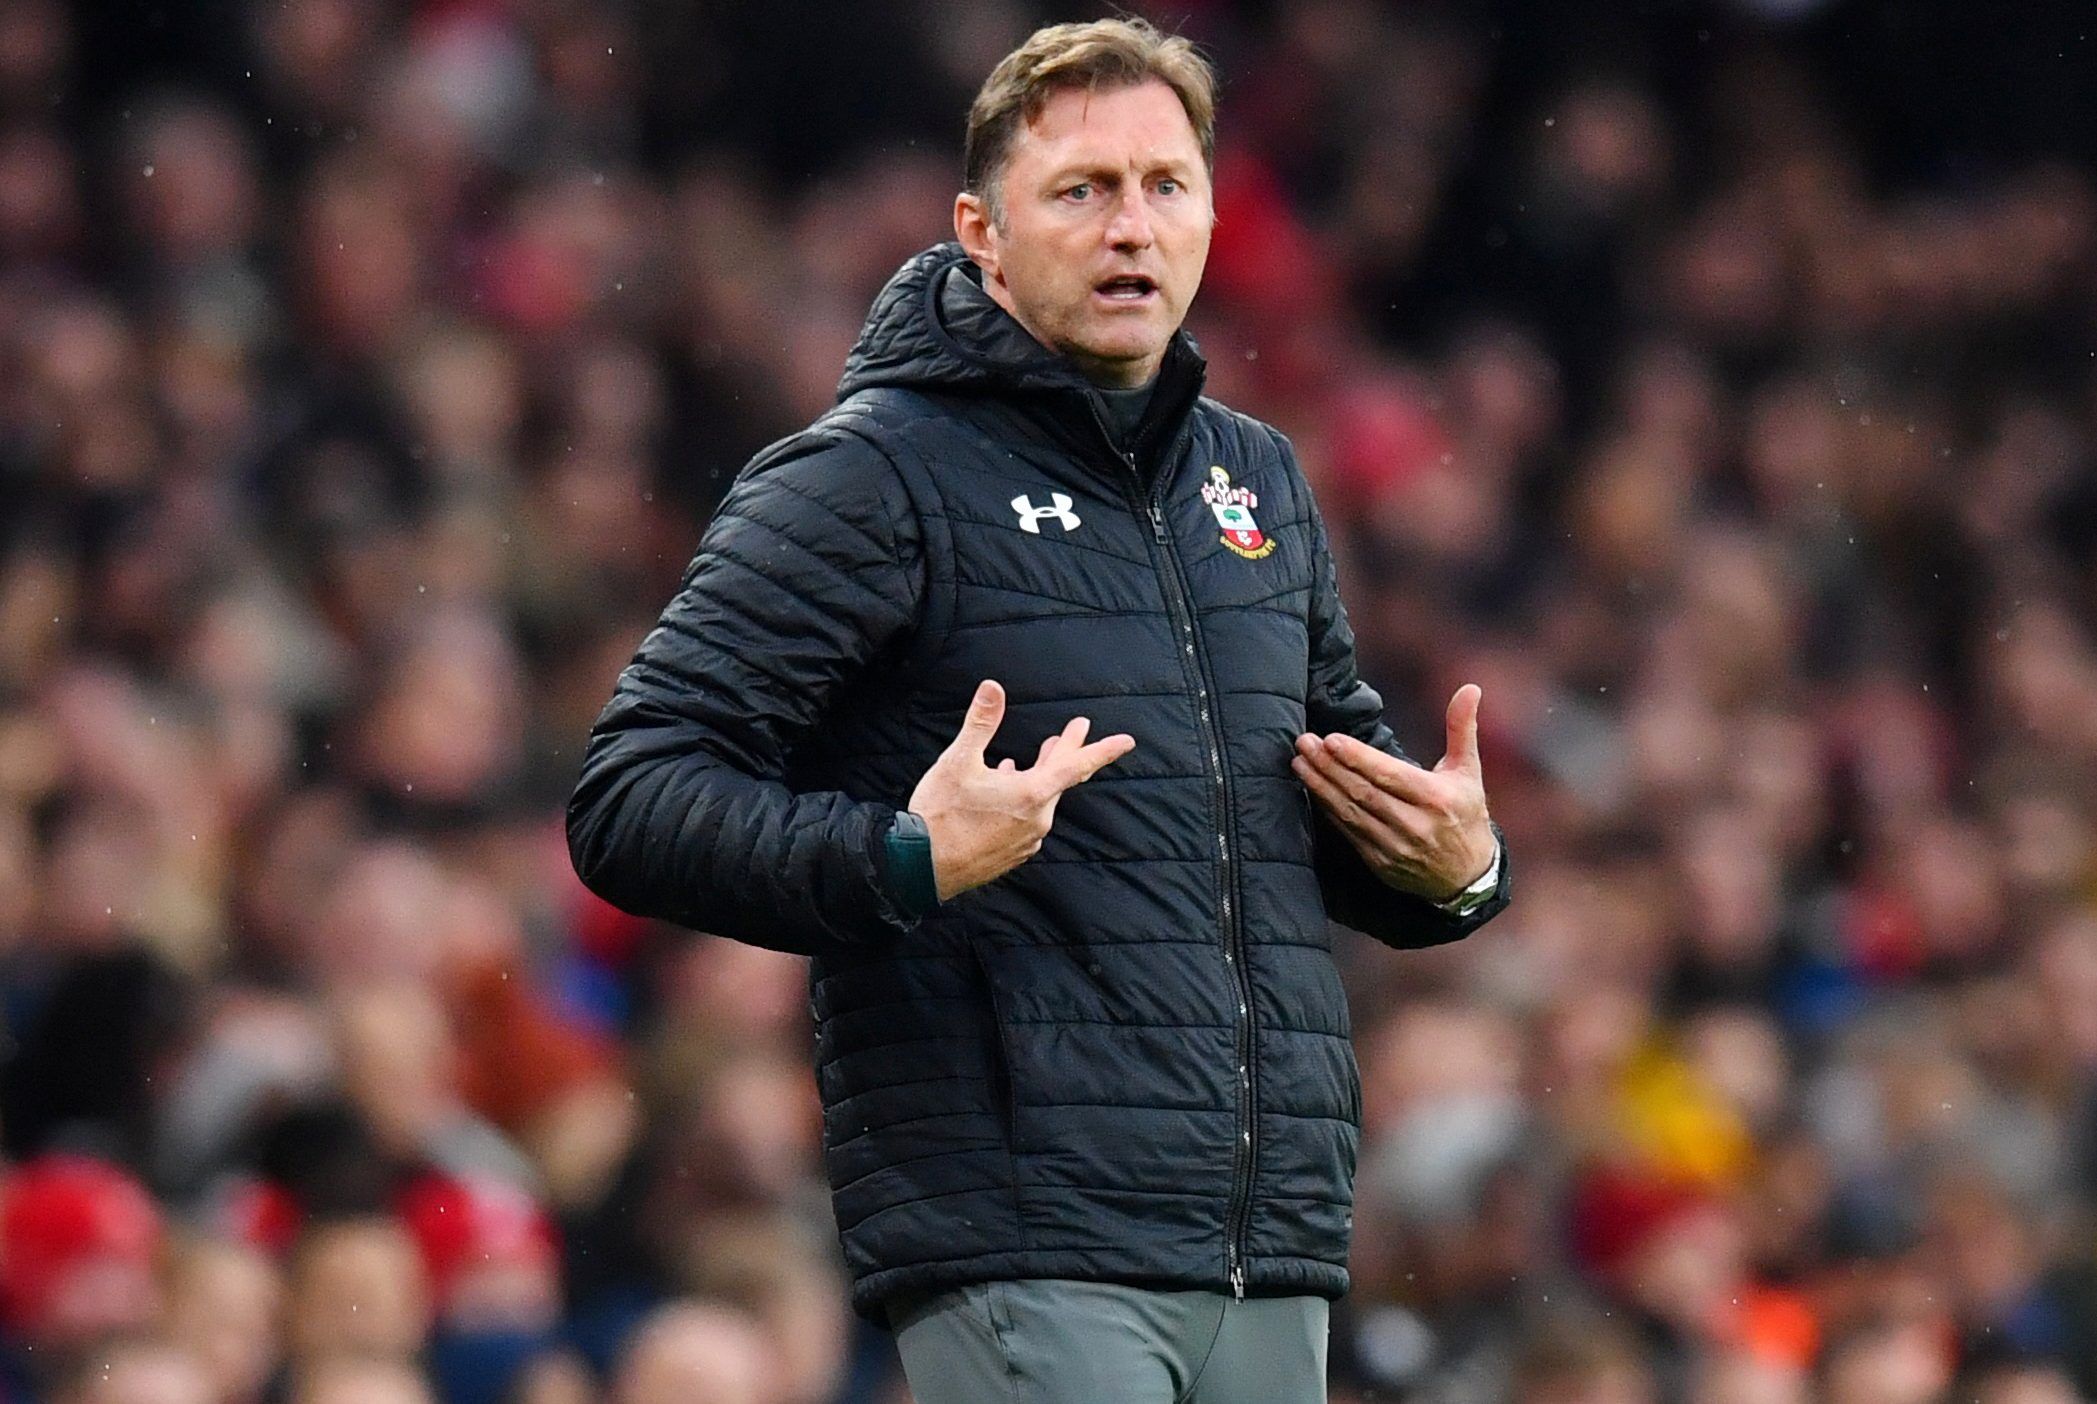 Soccer Football - Premier League - Arsenal v Southampton - Emirates Stadium, London, Britain - November 23, 2019  Southampton manager Ralph Hasenhuttl            REUTERS/Dylan Martinez  EDITORIAL USE ONLY. No use with unauthorized audio, video, data, fixture lists, club/league logos or 